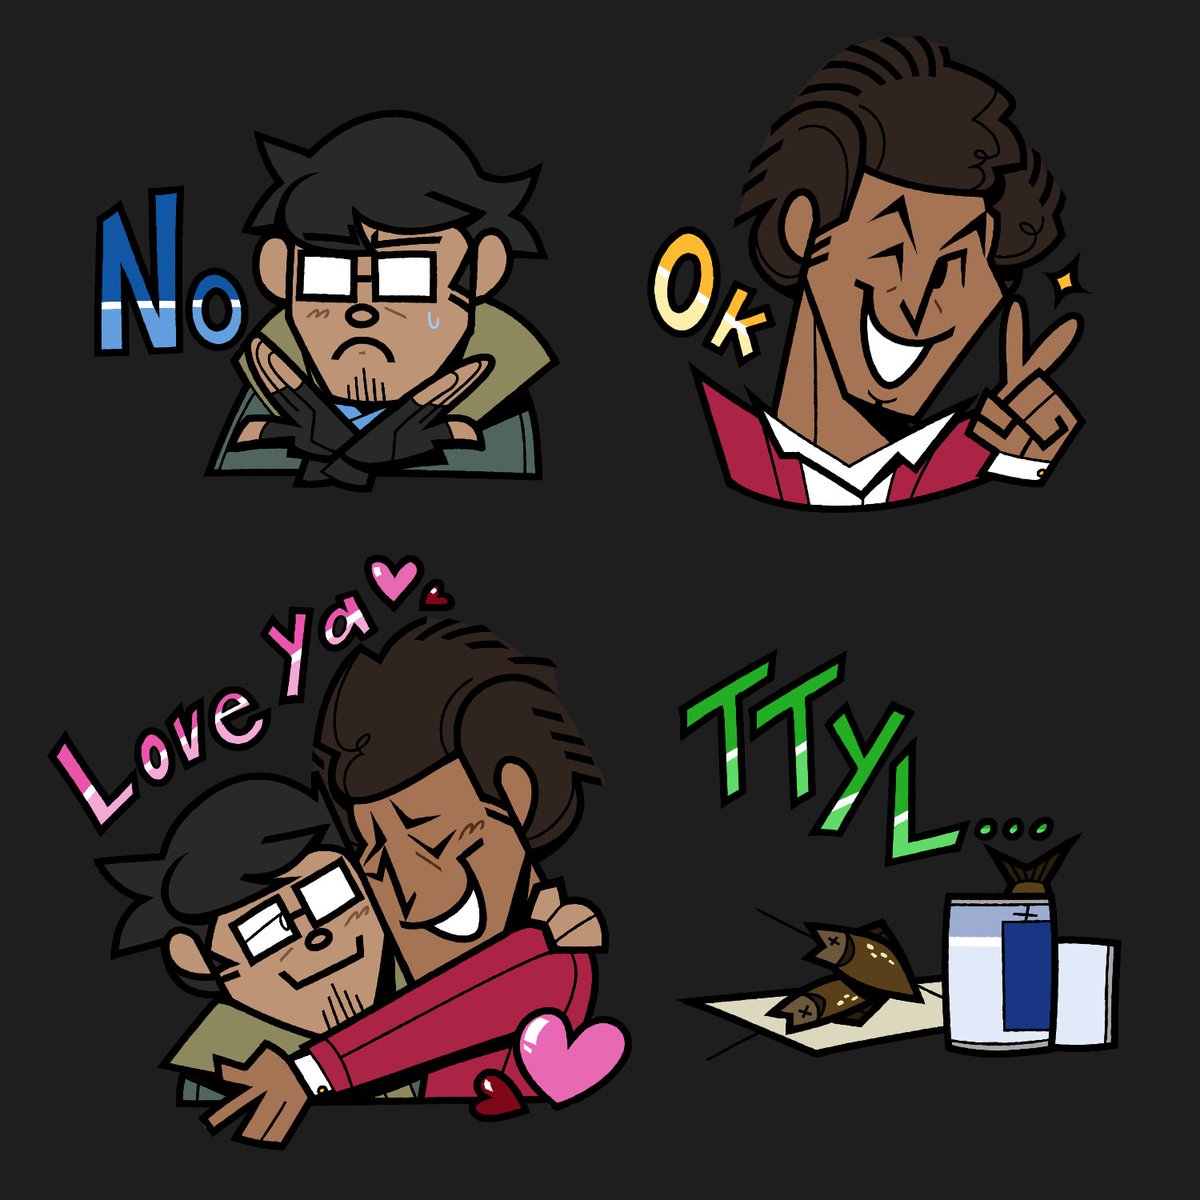 Stickers I got to do for the @ichinanbazine! Thank you so much for having me on it, and thank you to everyone who supported the zine!! <3